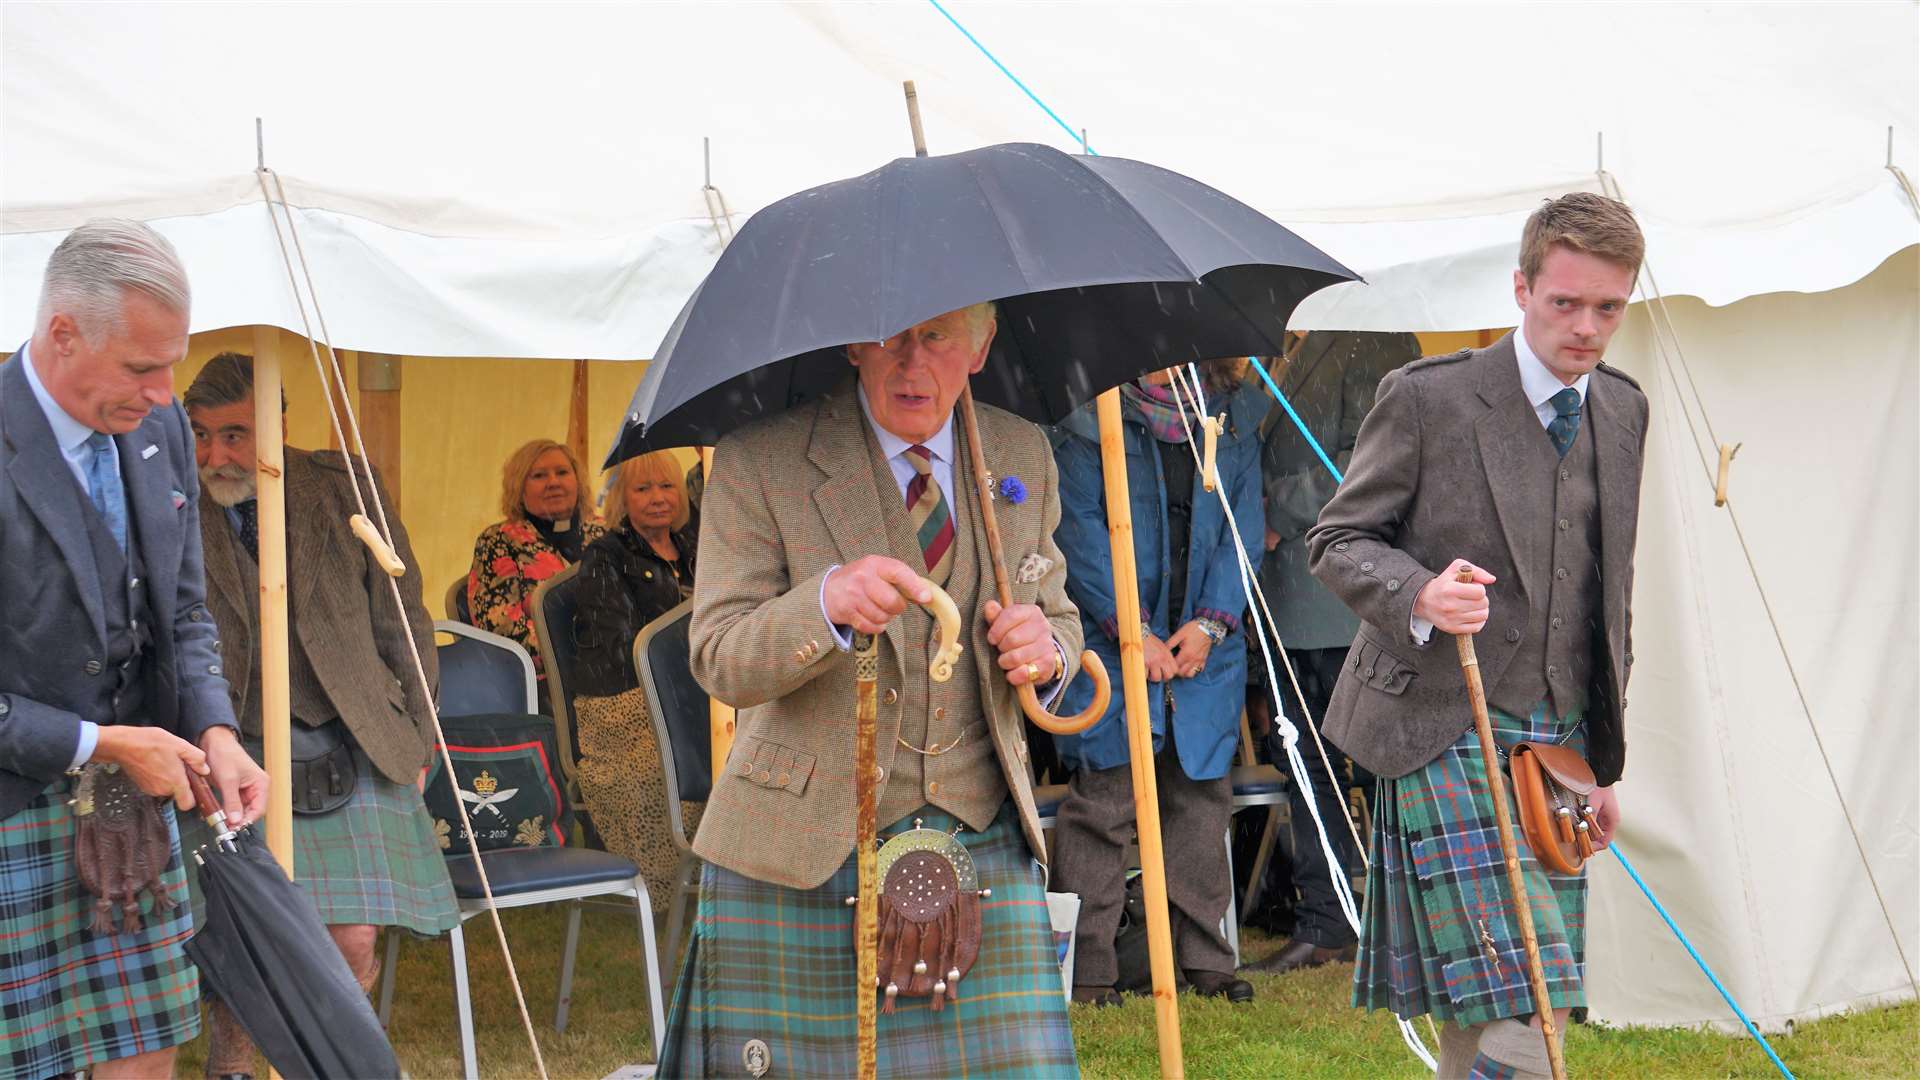 Prince Charles made good use of his brolly throughout the event. Picture: DGS